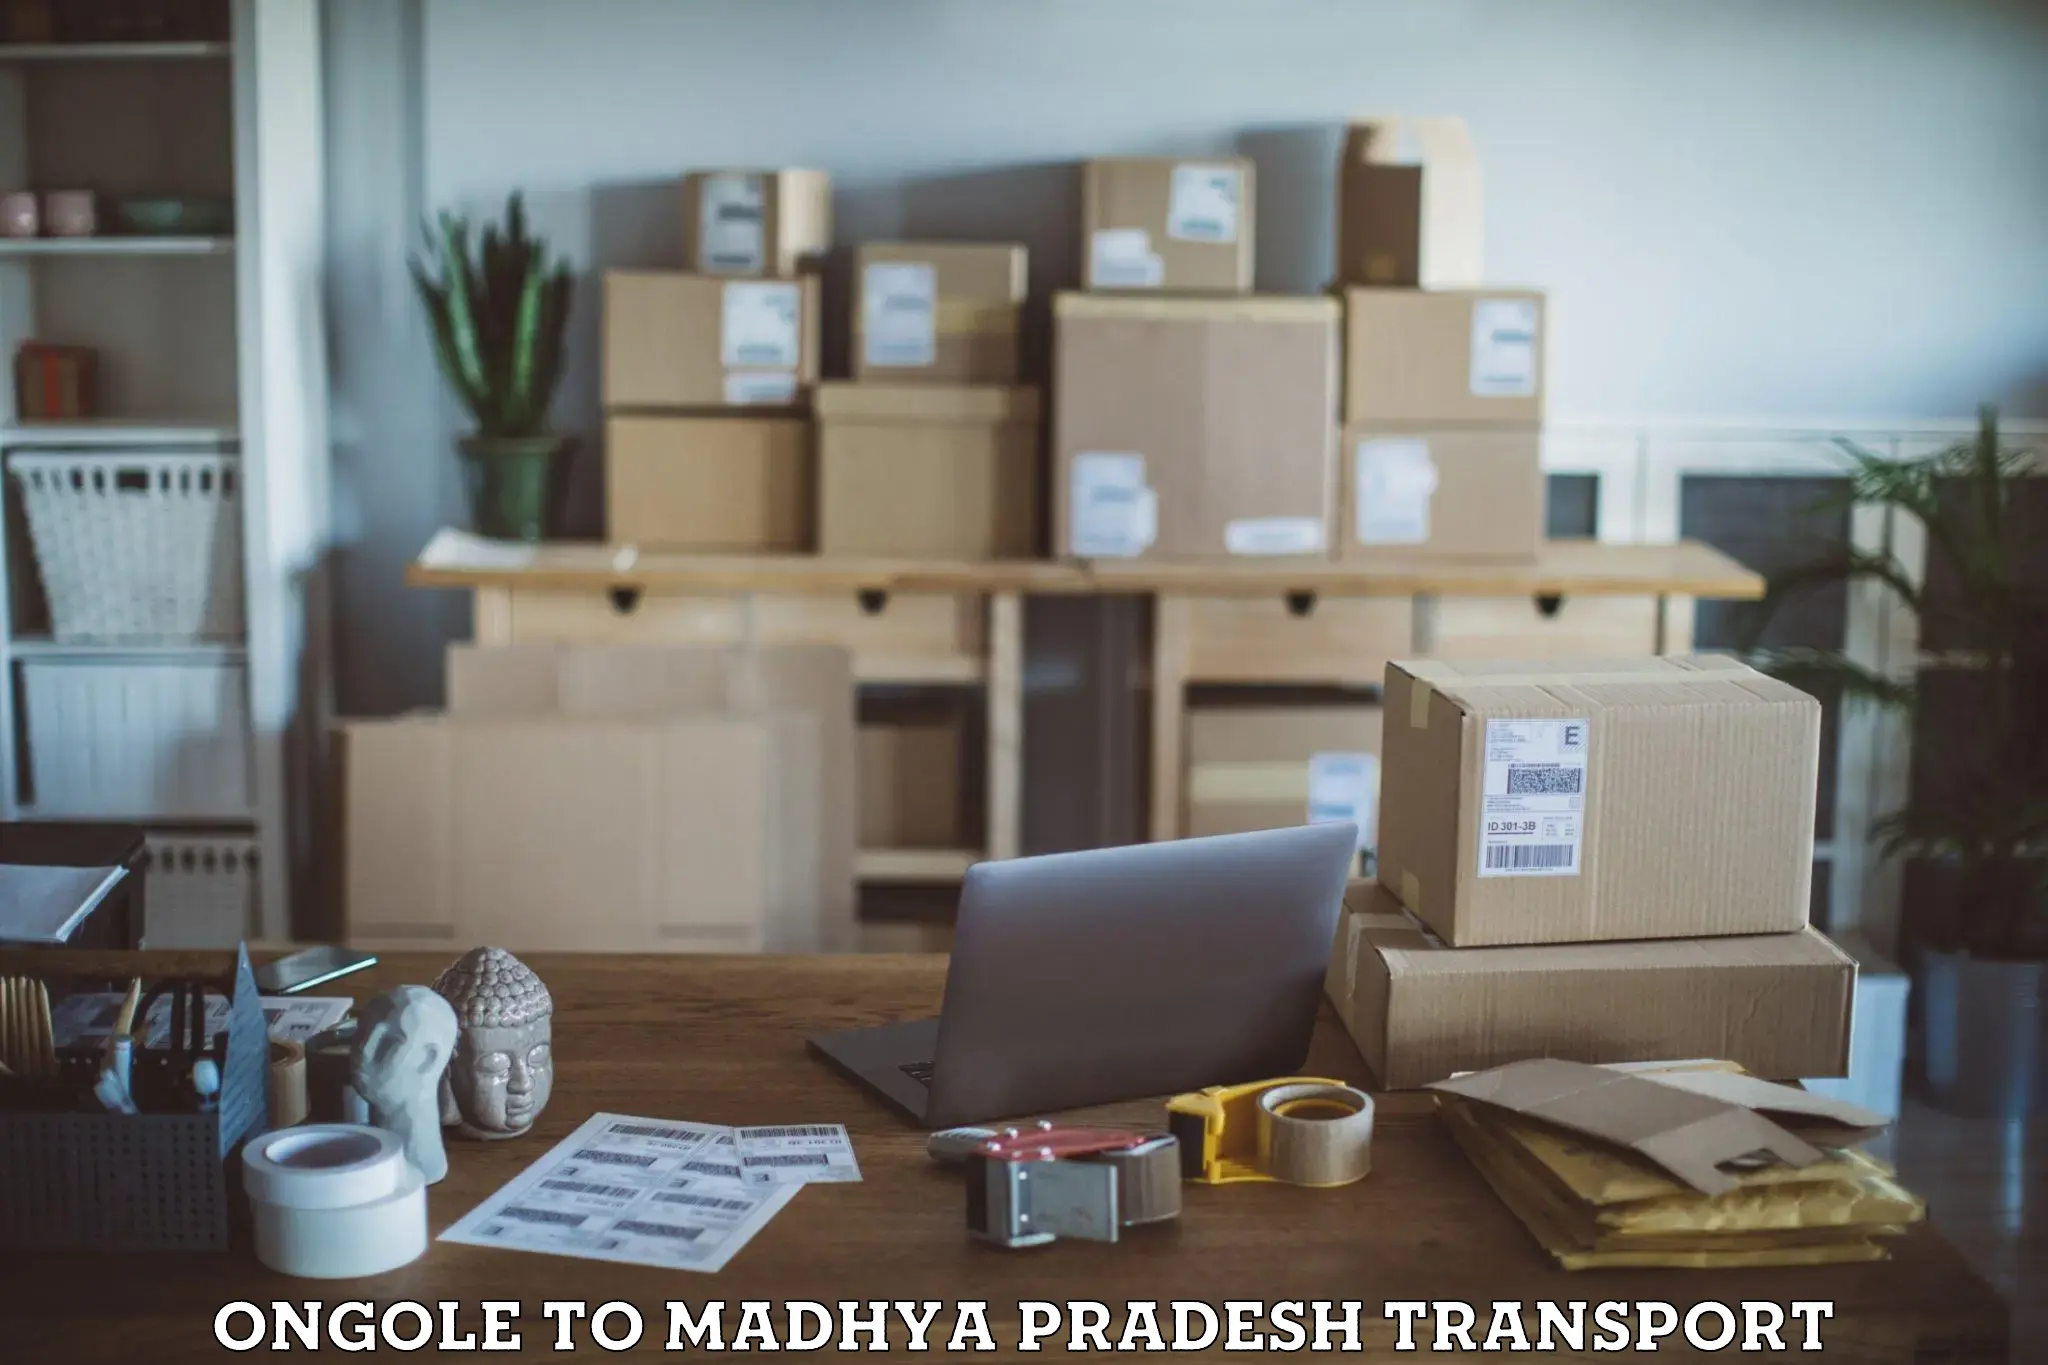 Container transport service Ongole to Maksudangarh